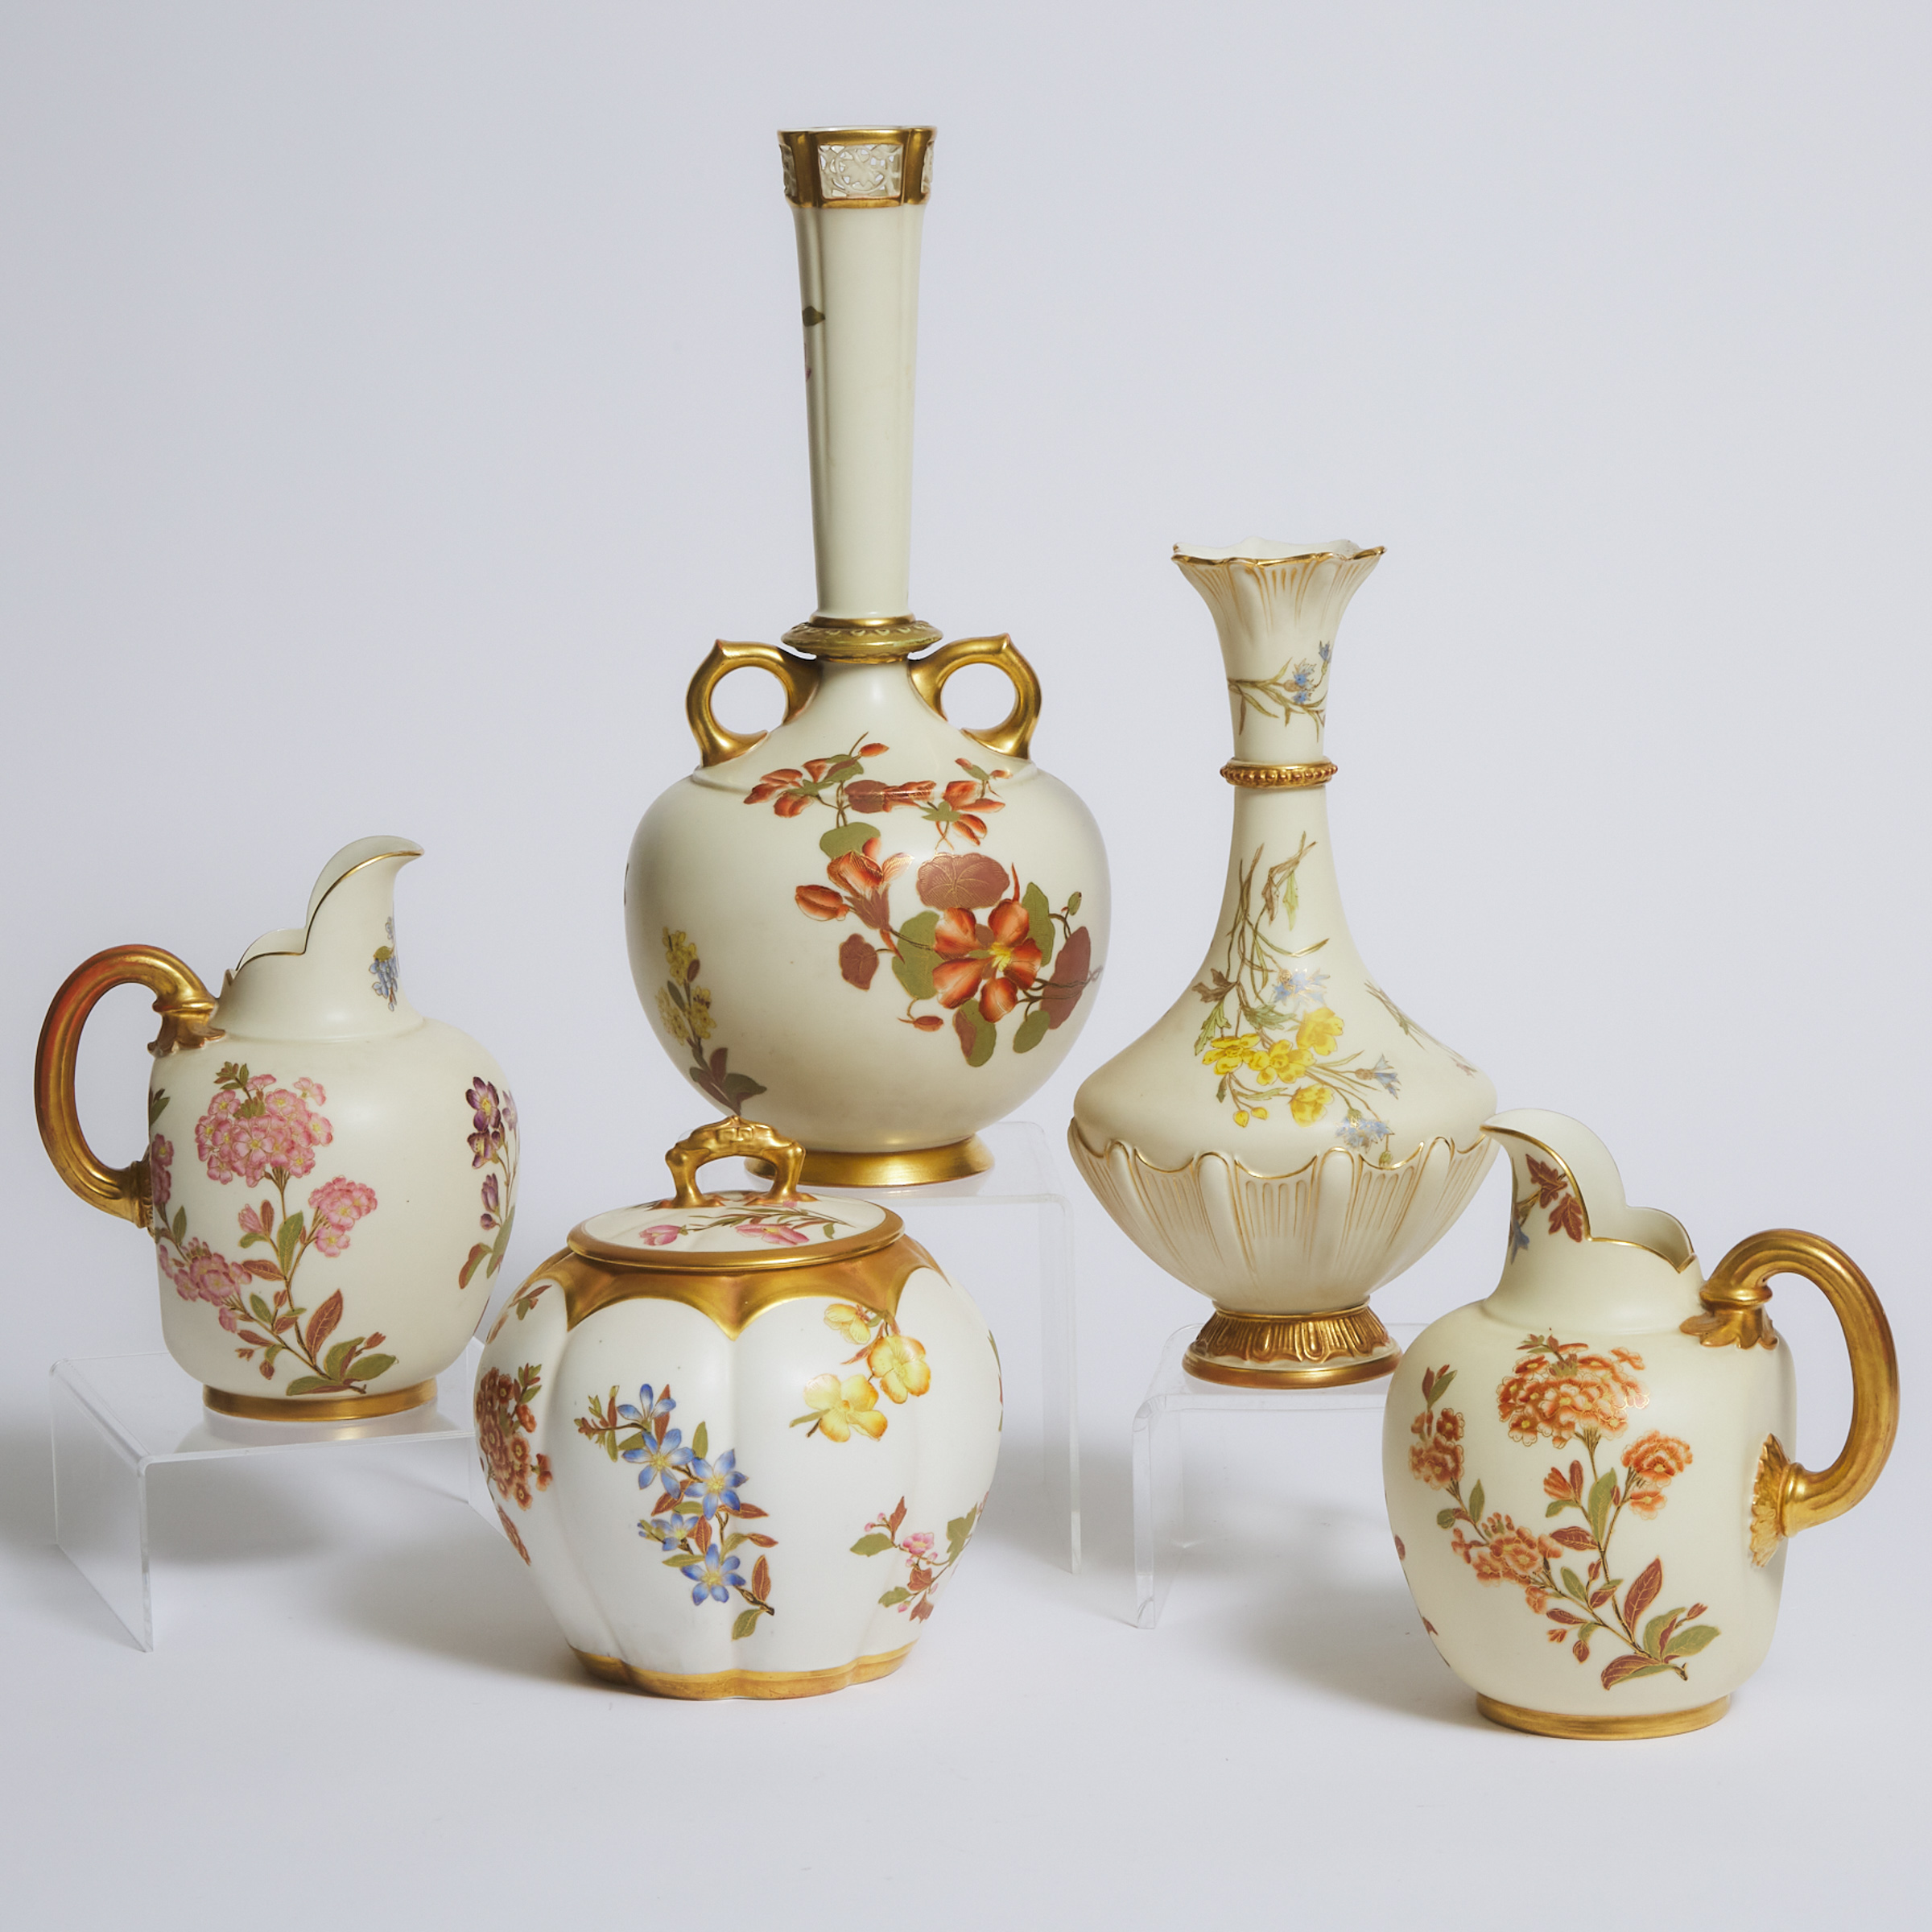 Group of Royal Worcester Porcelain, late 19th/early 20th century